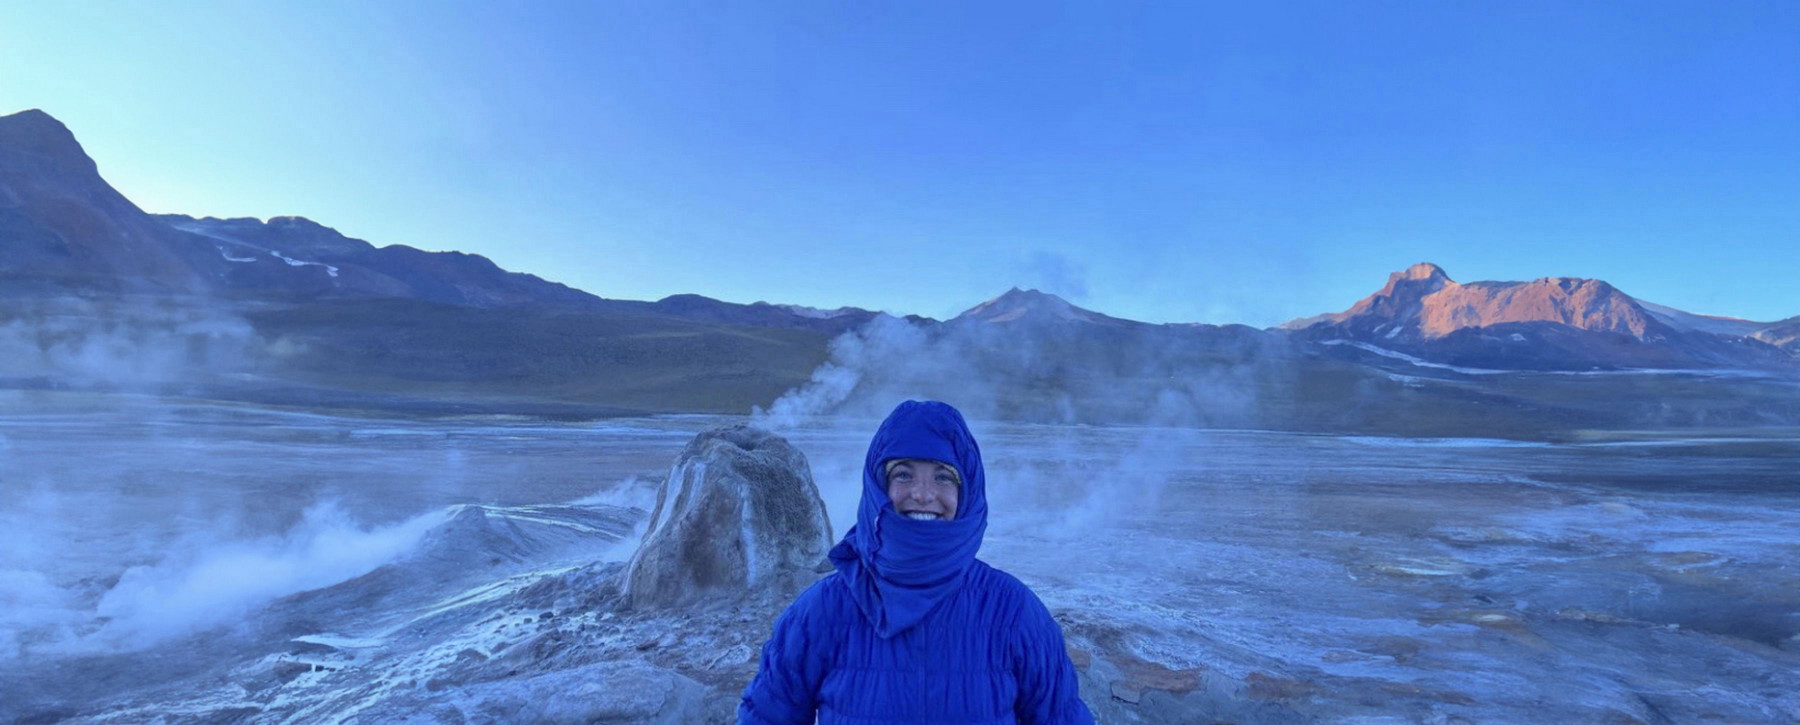 Haley Hood in a blue jacket standing in front of a mountain